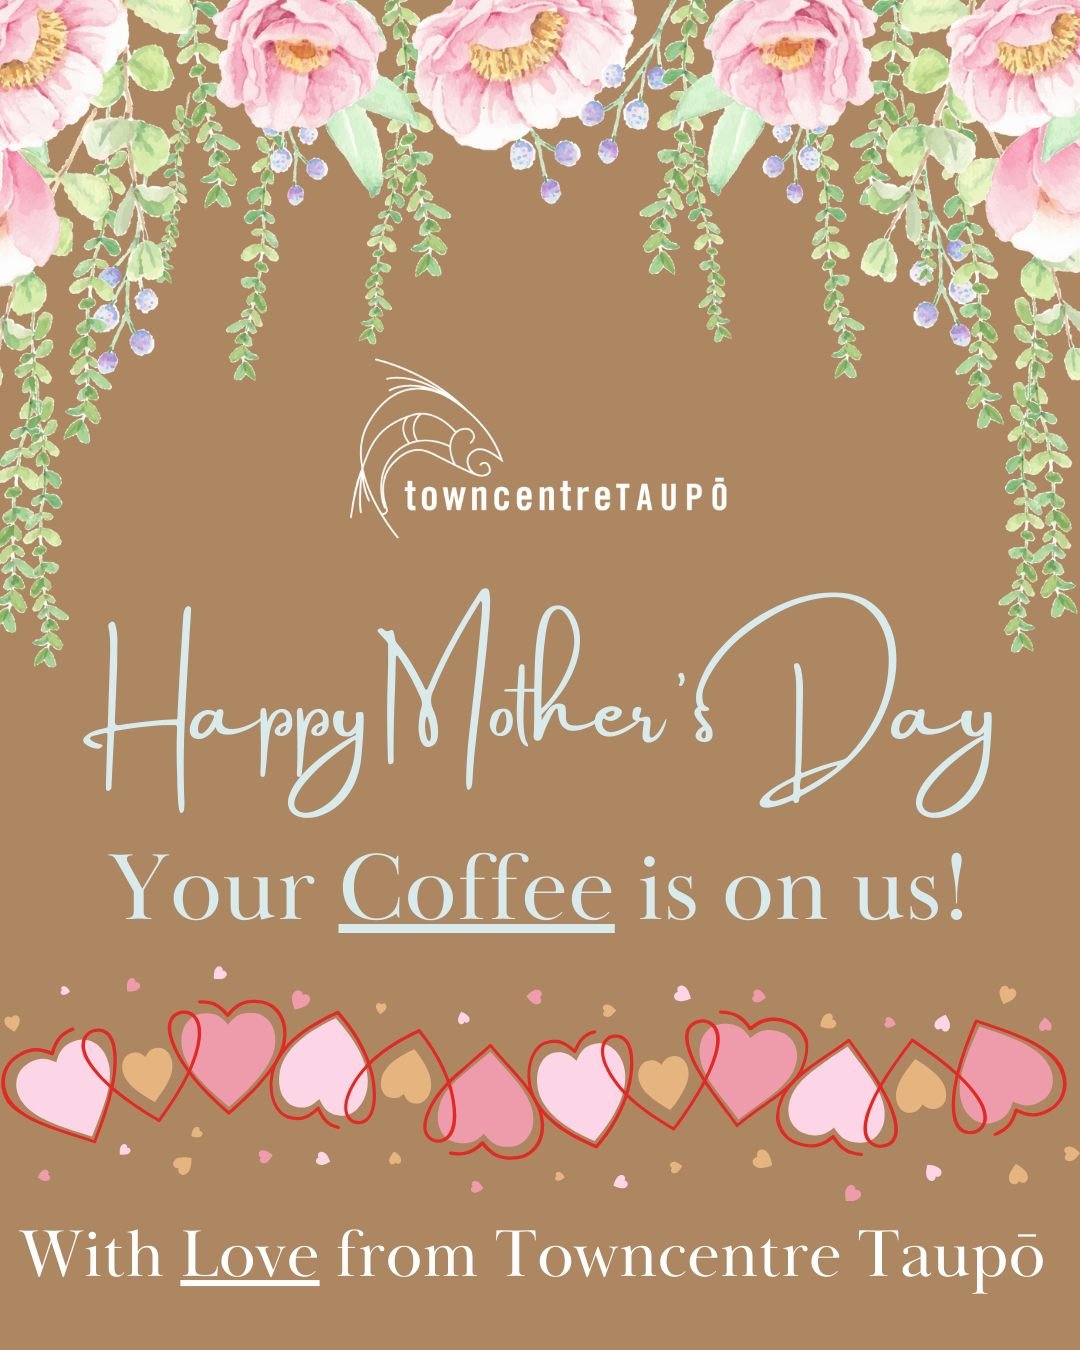 ☕🎁 We want to treat the Mum's this Mother's Day.  How does a free cup of coffee sound?

🎊🫖Towncentre Taupo is shouting 600 free coffees within the town centre starting tomorrow and lasting until the vouchers run out!

👩 ❤️ We're looking for the m